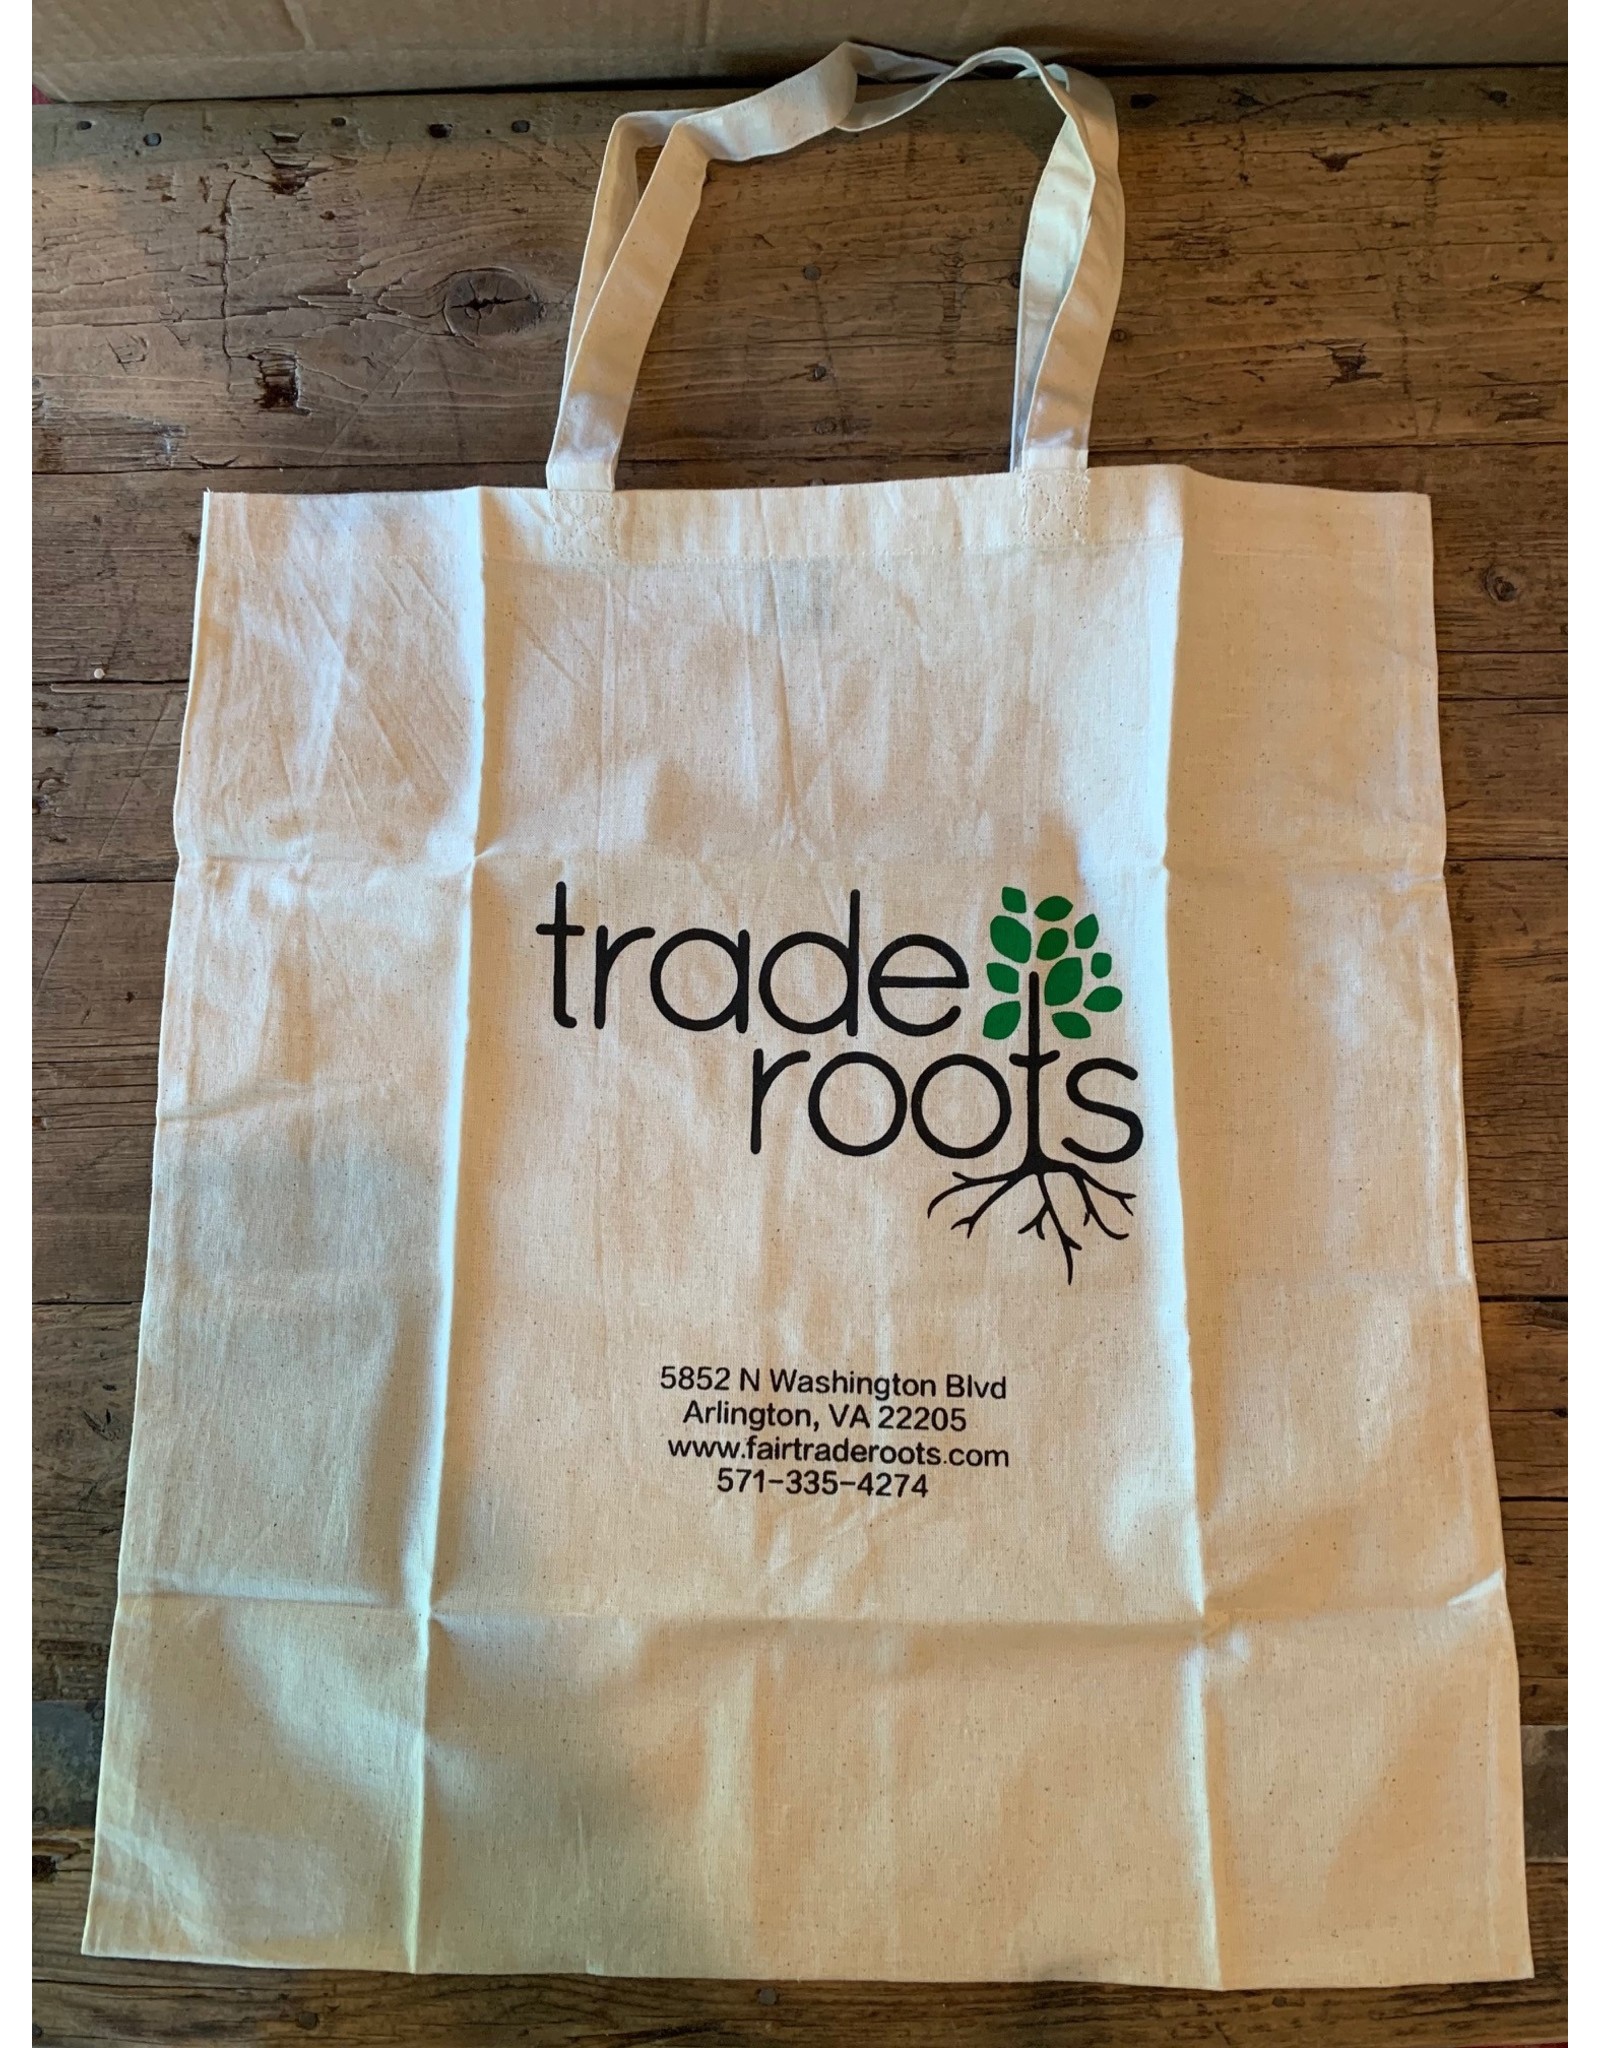 Trade roots Trade Roots Cotton Bag